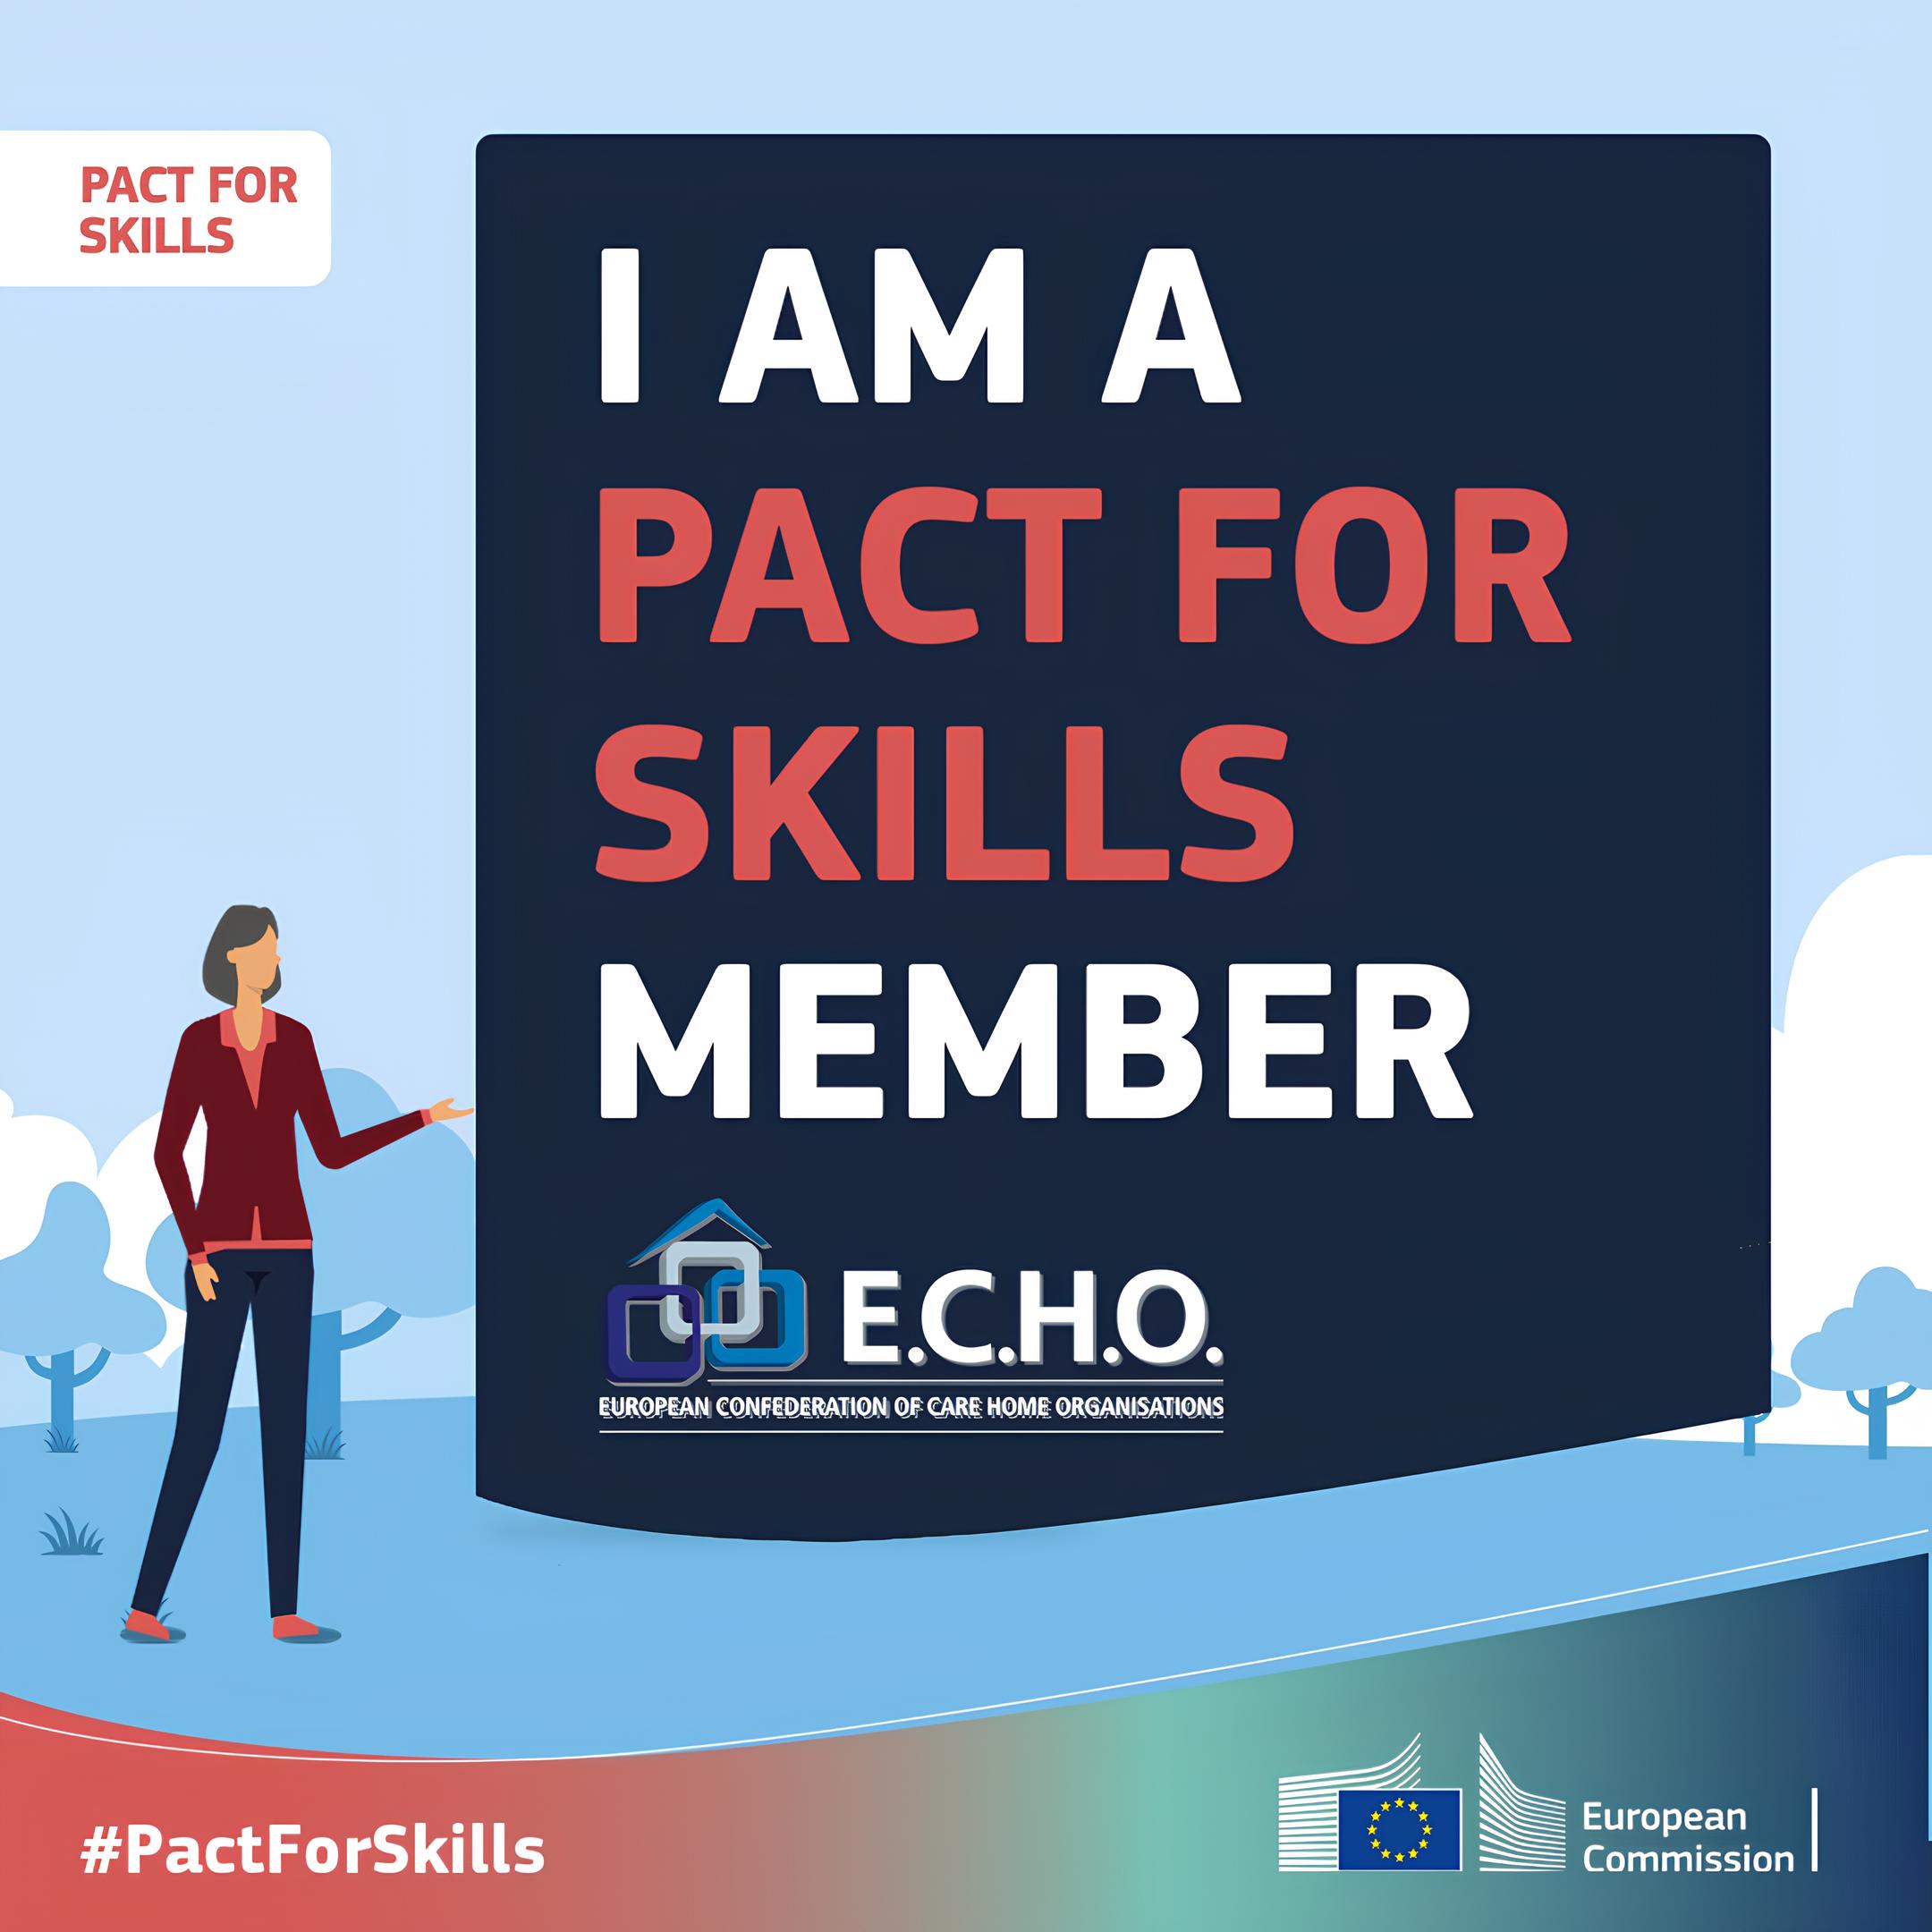 ECHO Joins “Pact for Skills” for Health Ecosystem Enhancement